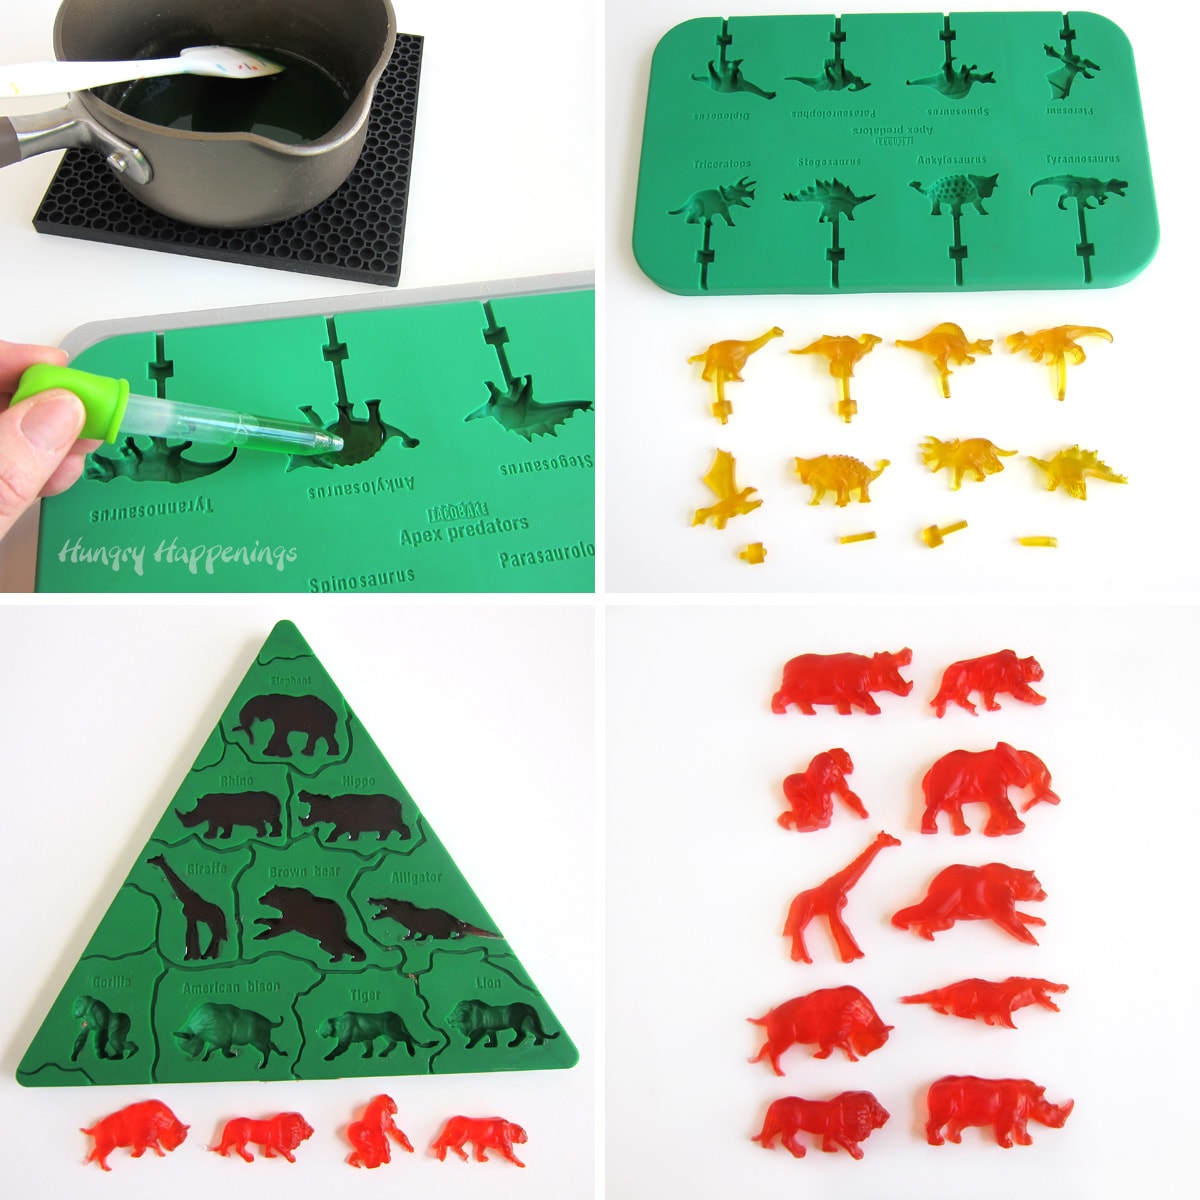 making dinosour gummies and African animal gummies using Apex preditors silicone candy molds